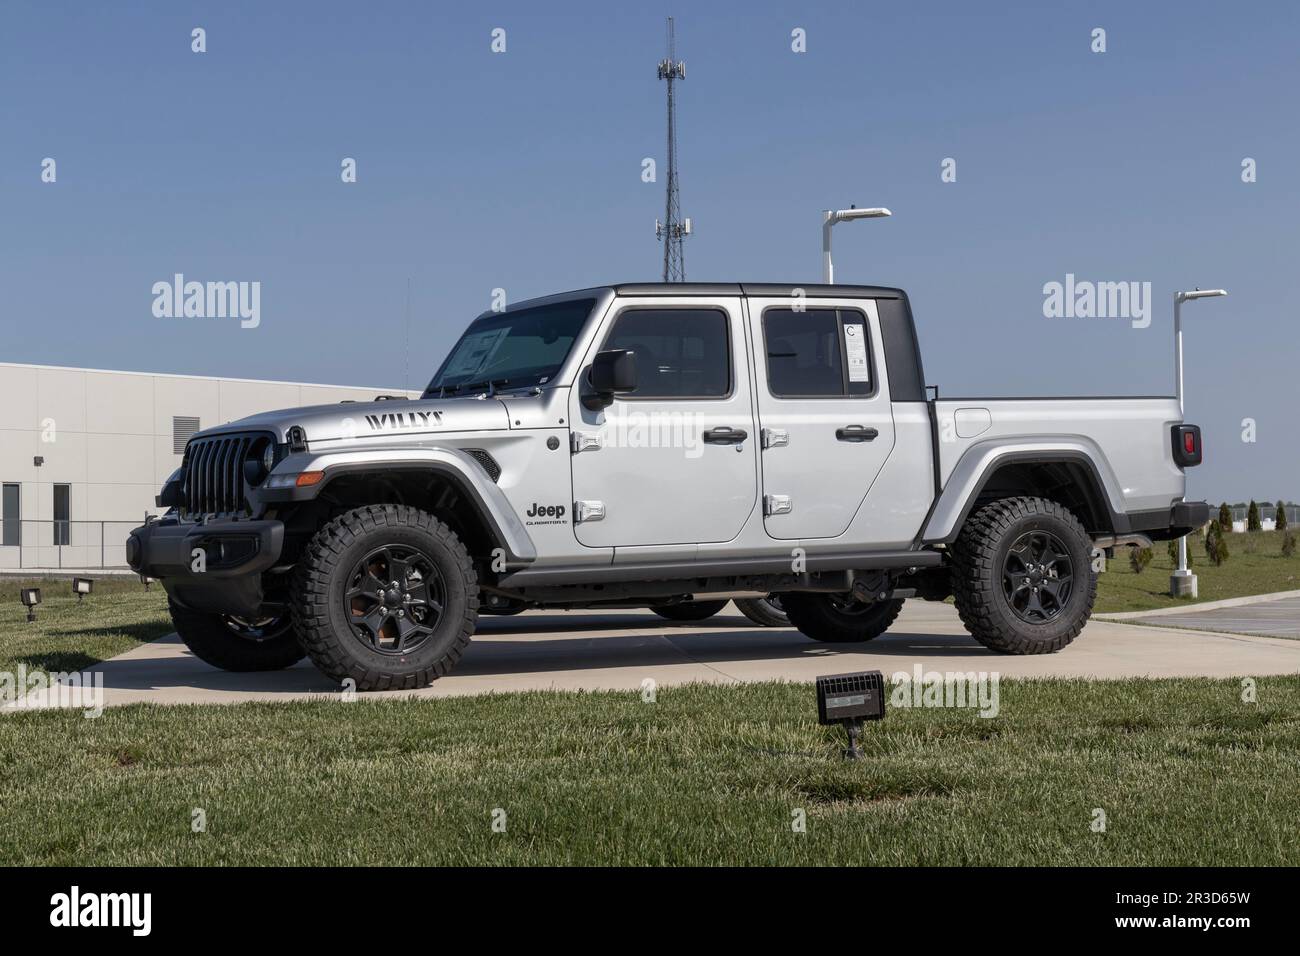 Tipton - Circa May 2023: Jeep Gladiator display at a Stellantis dealer. The Jeep Gladiator models include the Sport, Willys, Rubicon and Mojave. Stock Photo